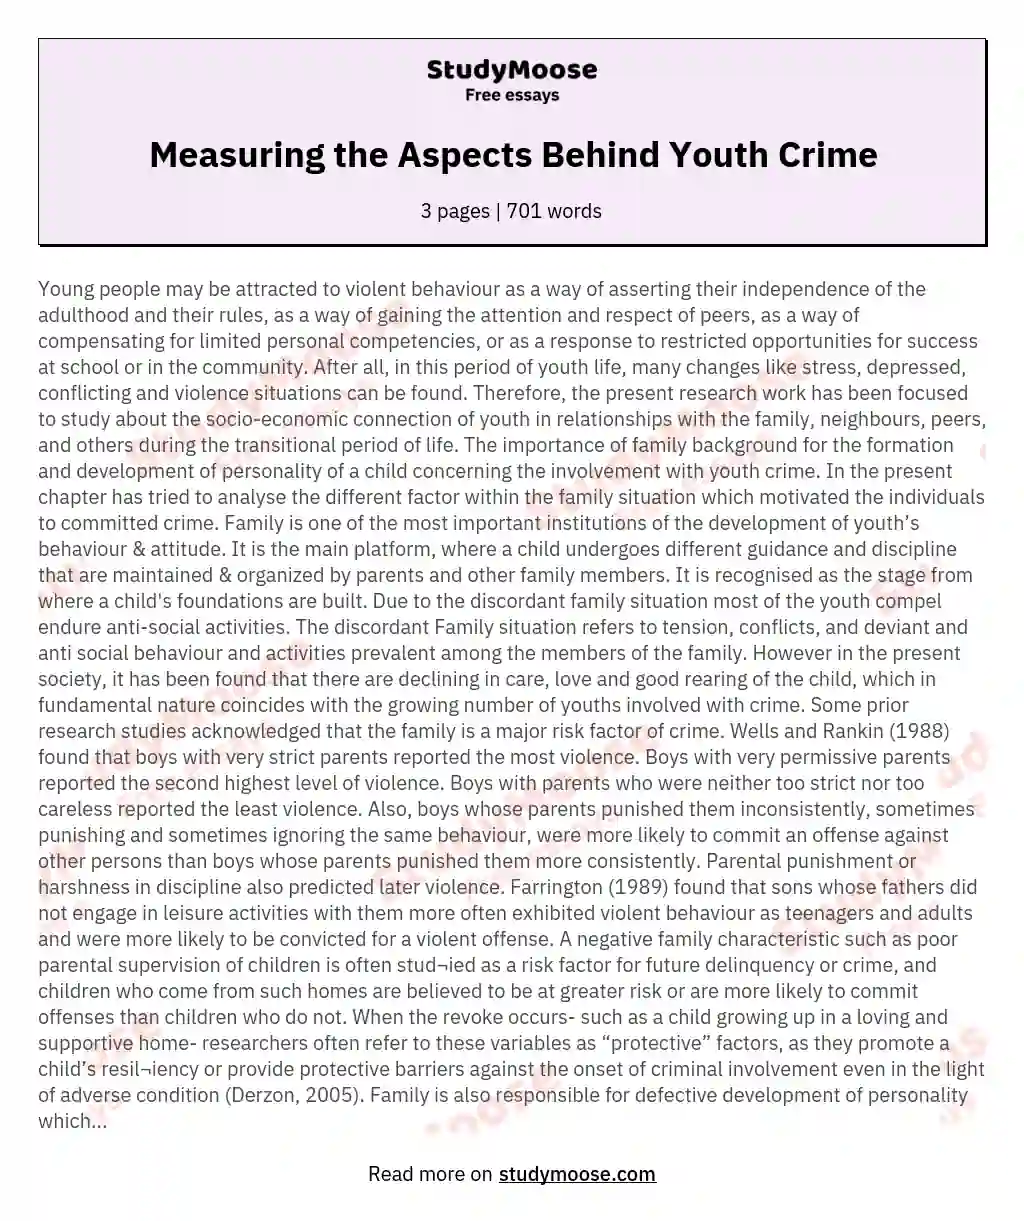 Measuring the Aspects Behind Youth Crime